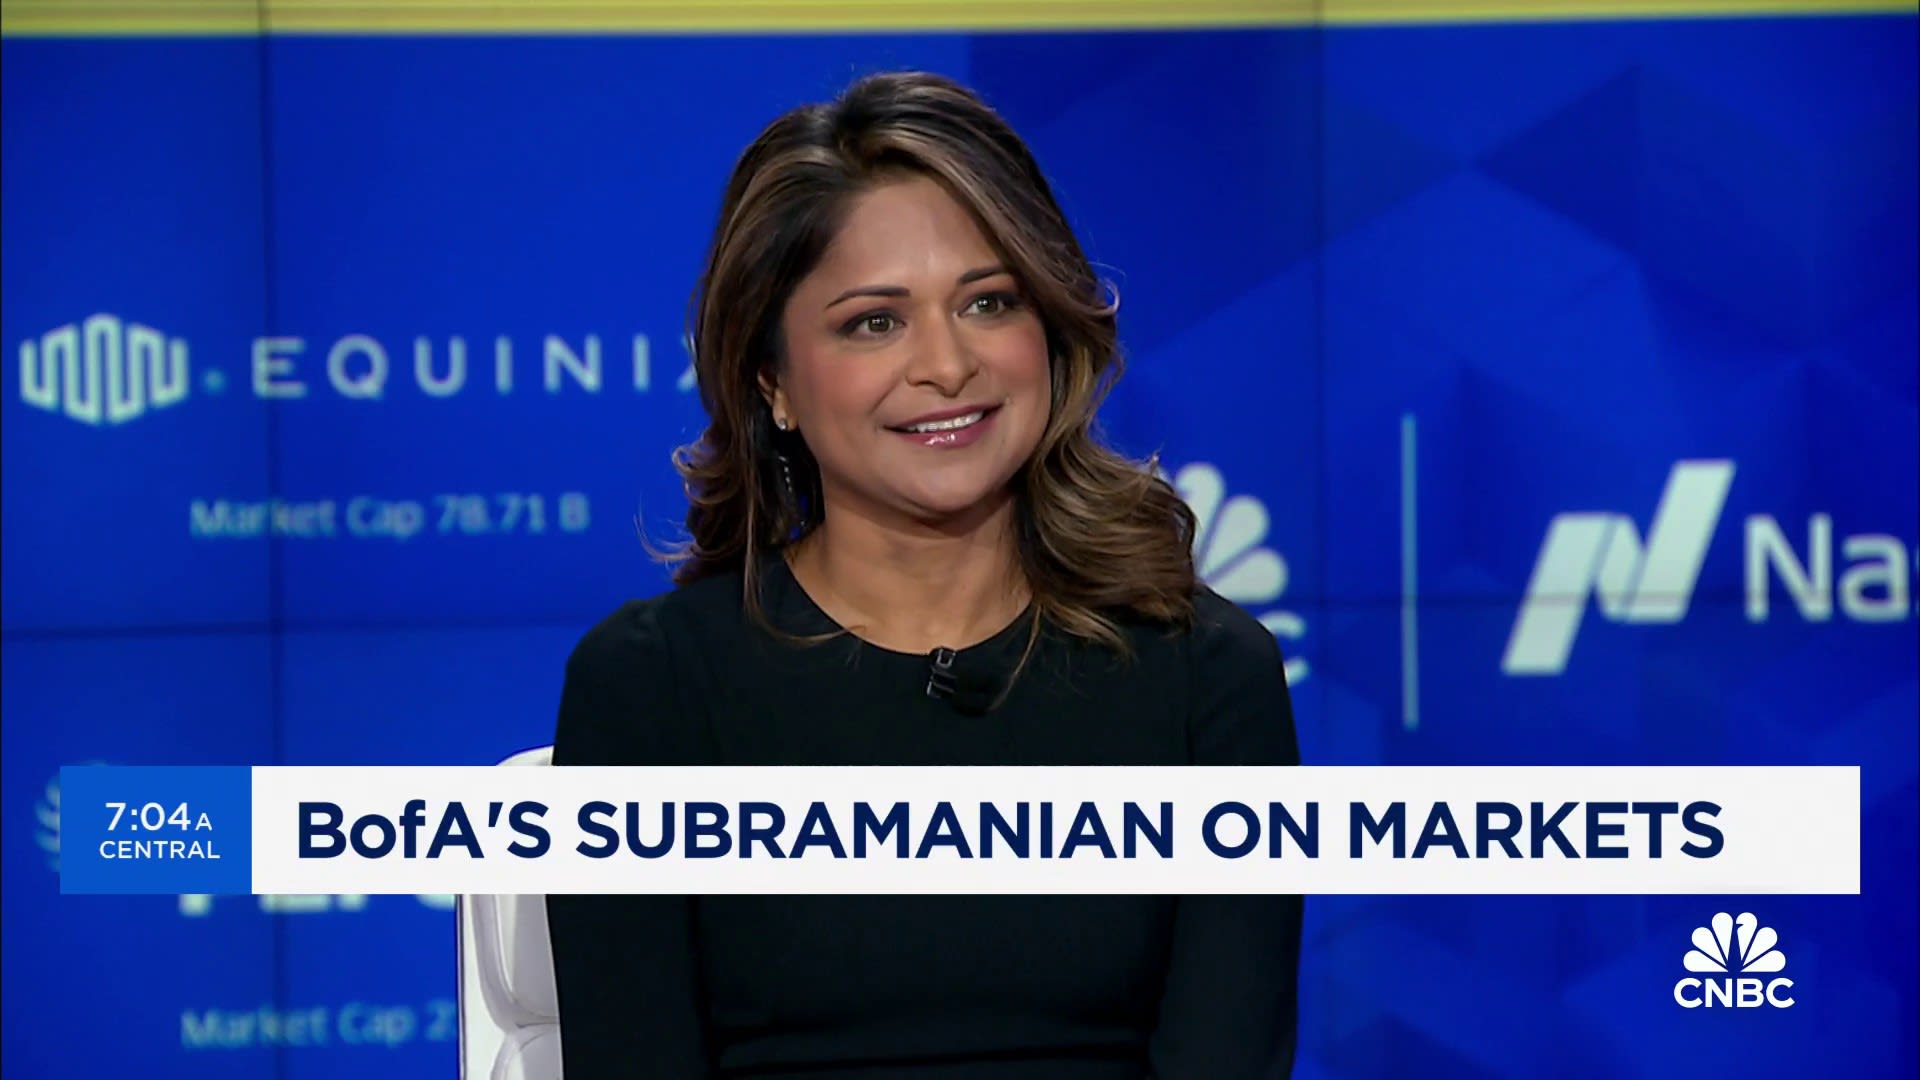 The idea that the market is too expensive should be debunked, says BofA's Savita Subramanian